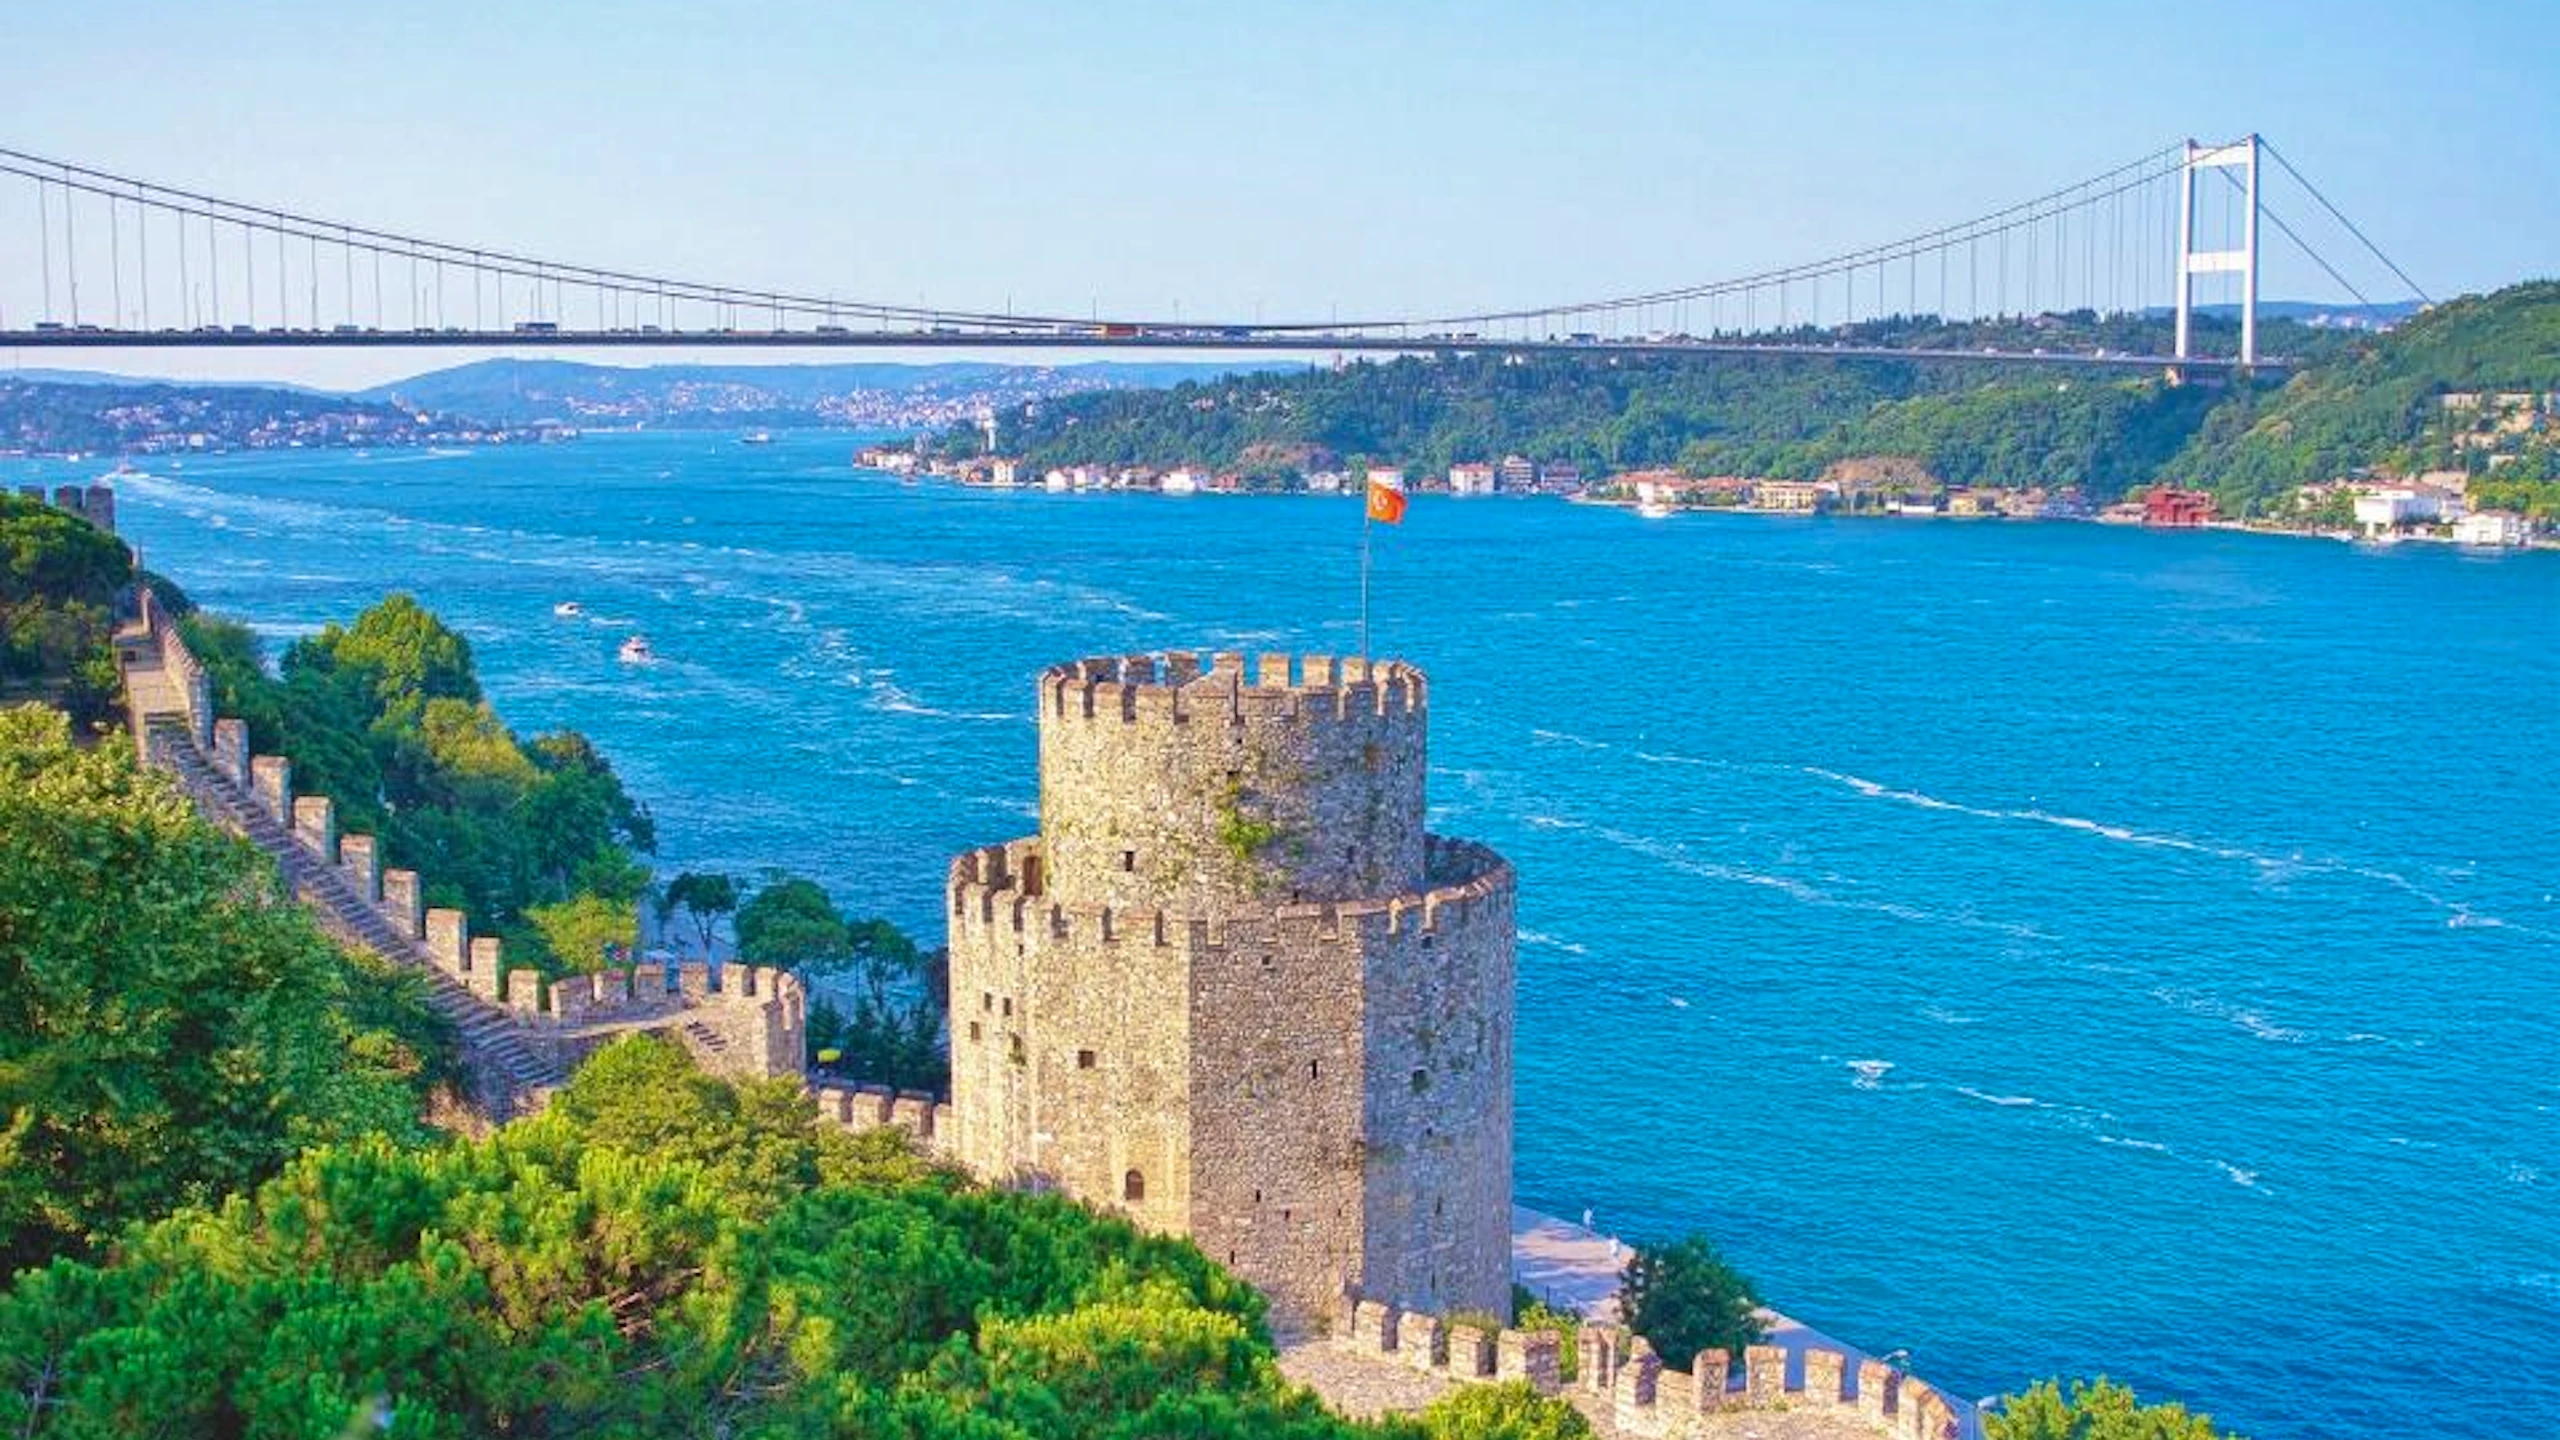 Istanbul Bosphorus Cruise Tour, Bus and Cable Car Ride Price